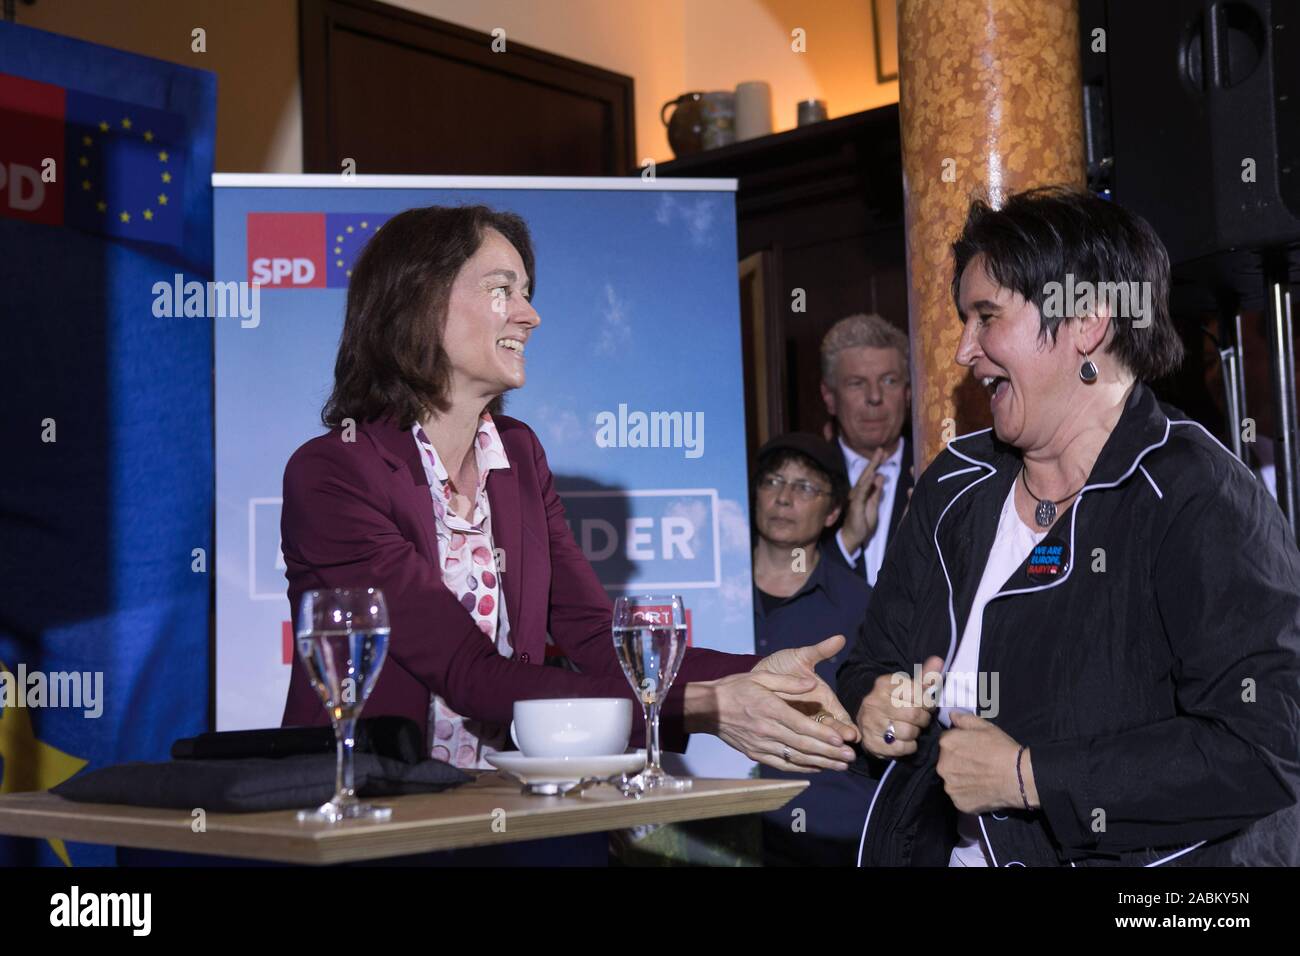 Top candidate Katarina Barley speaks at a campaign event of the SPD for the European elections 2019 in the Franziskaner in Munich. Maria Noichl, Member of the European Parliament, sits to her right and Dieter Reiter, Lord Mayor, stands in the background. [automated translation] Stock Photo